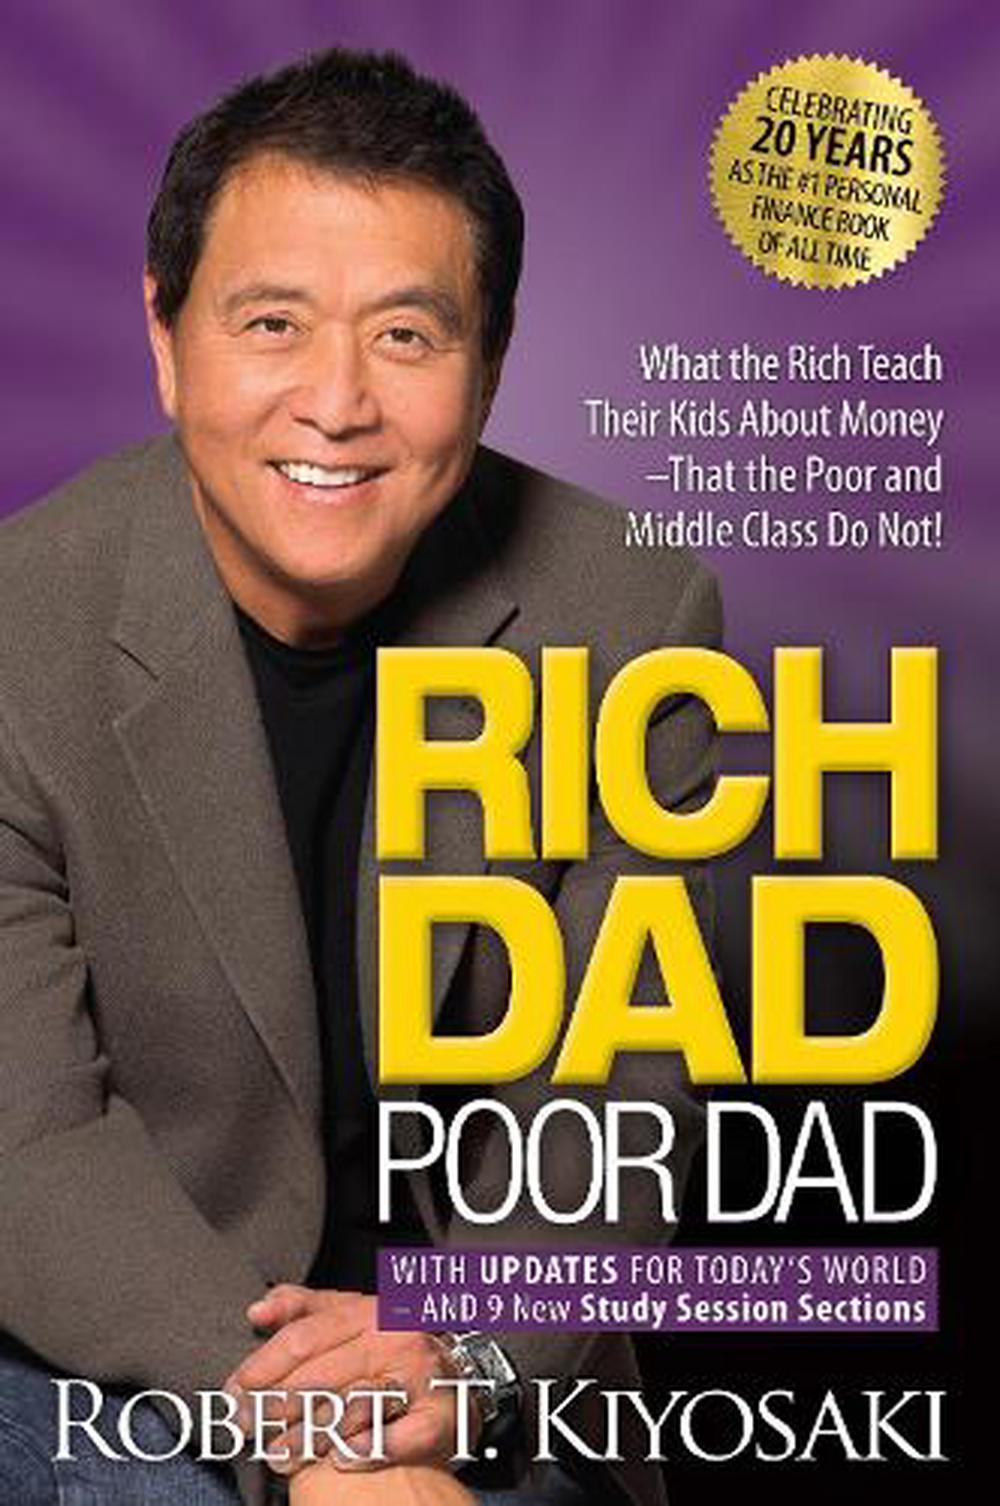 book review of rich dad poor dad for students